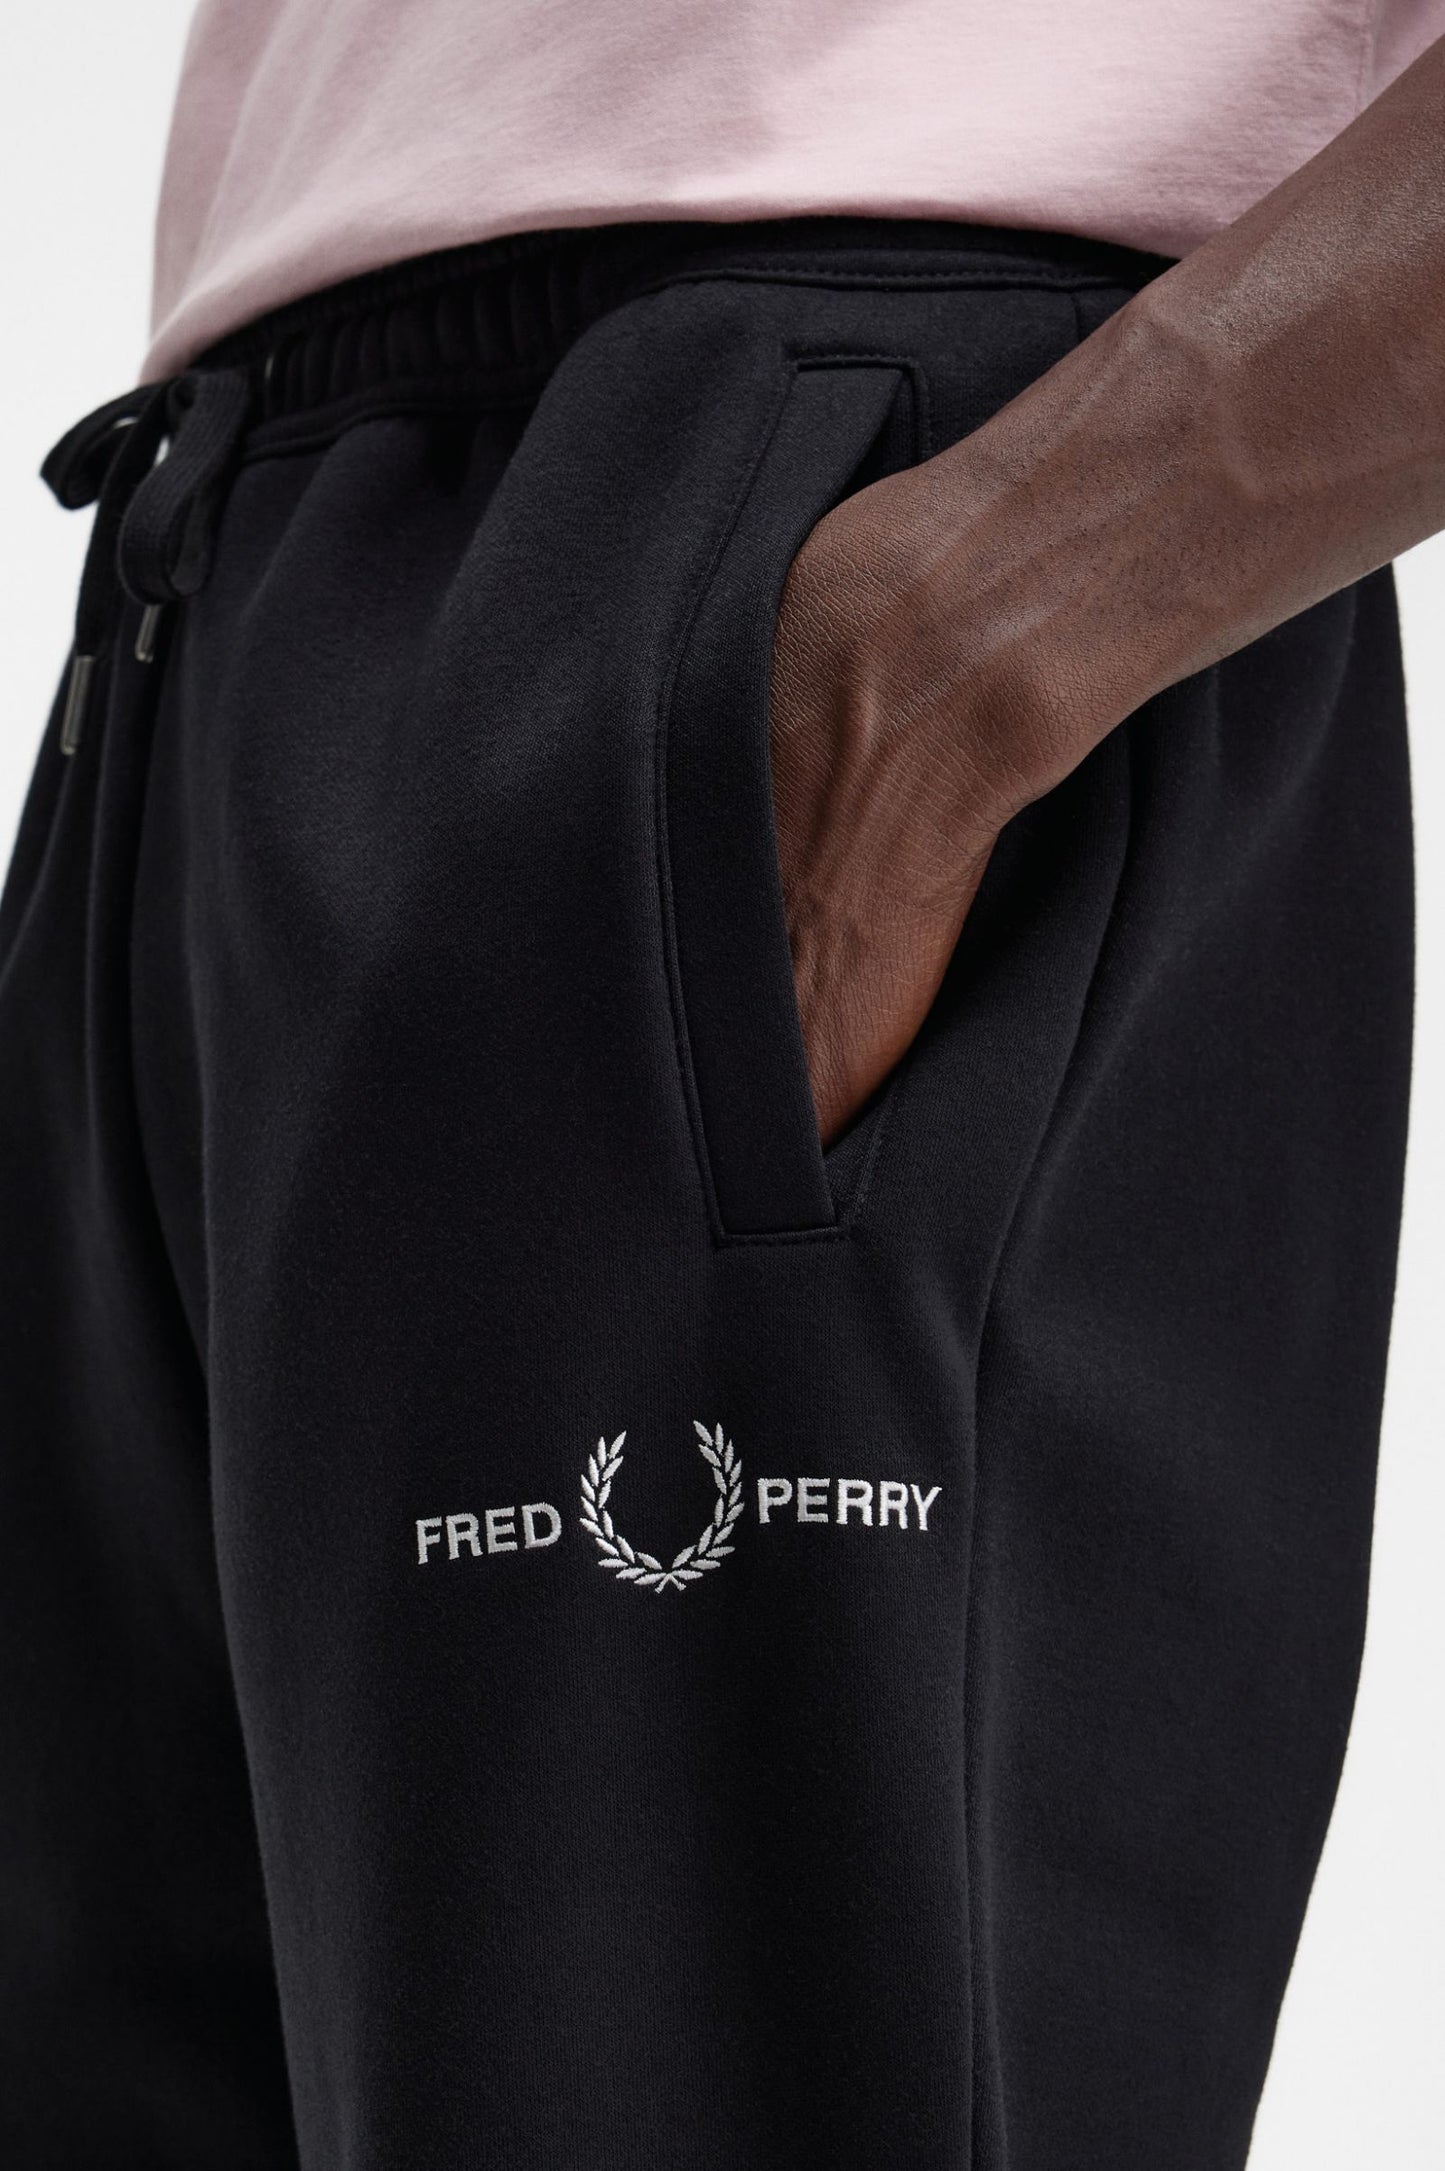 Fred Perry Embroidered Sweat Pants Black